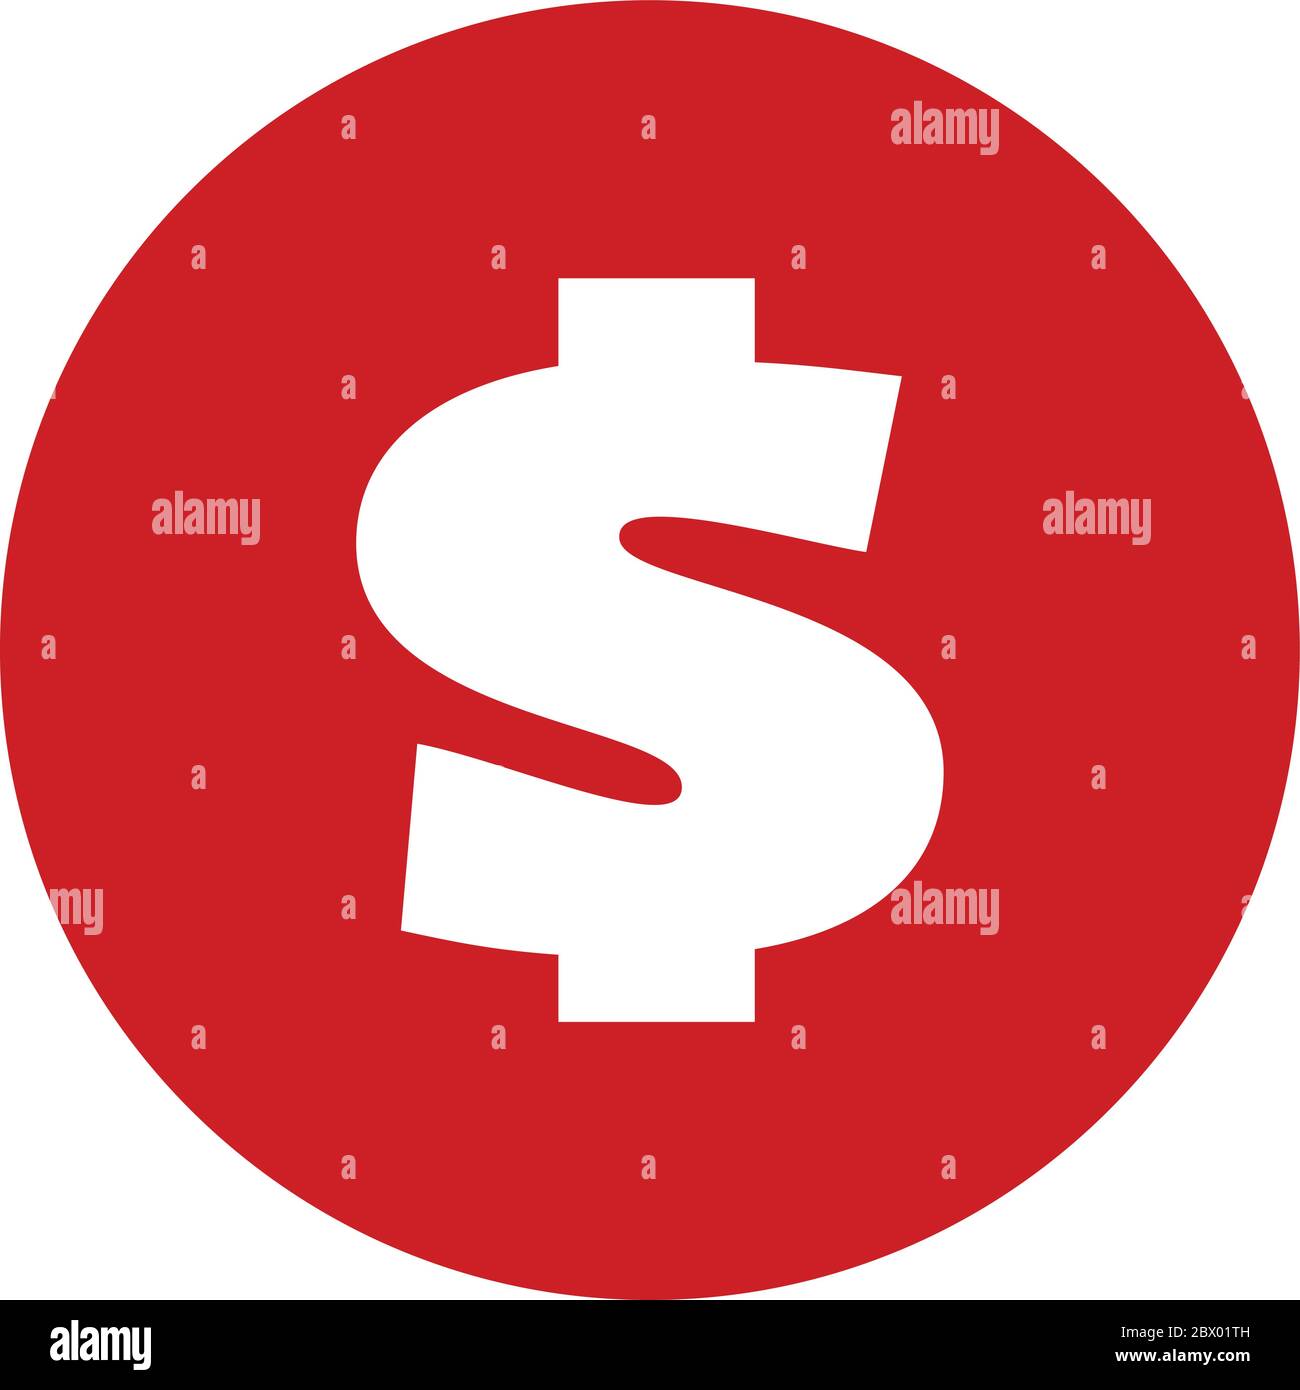 Money Icon Negative- An Illustration of a Negative Money Icon. Stock Vector